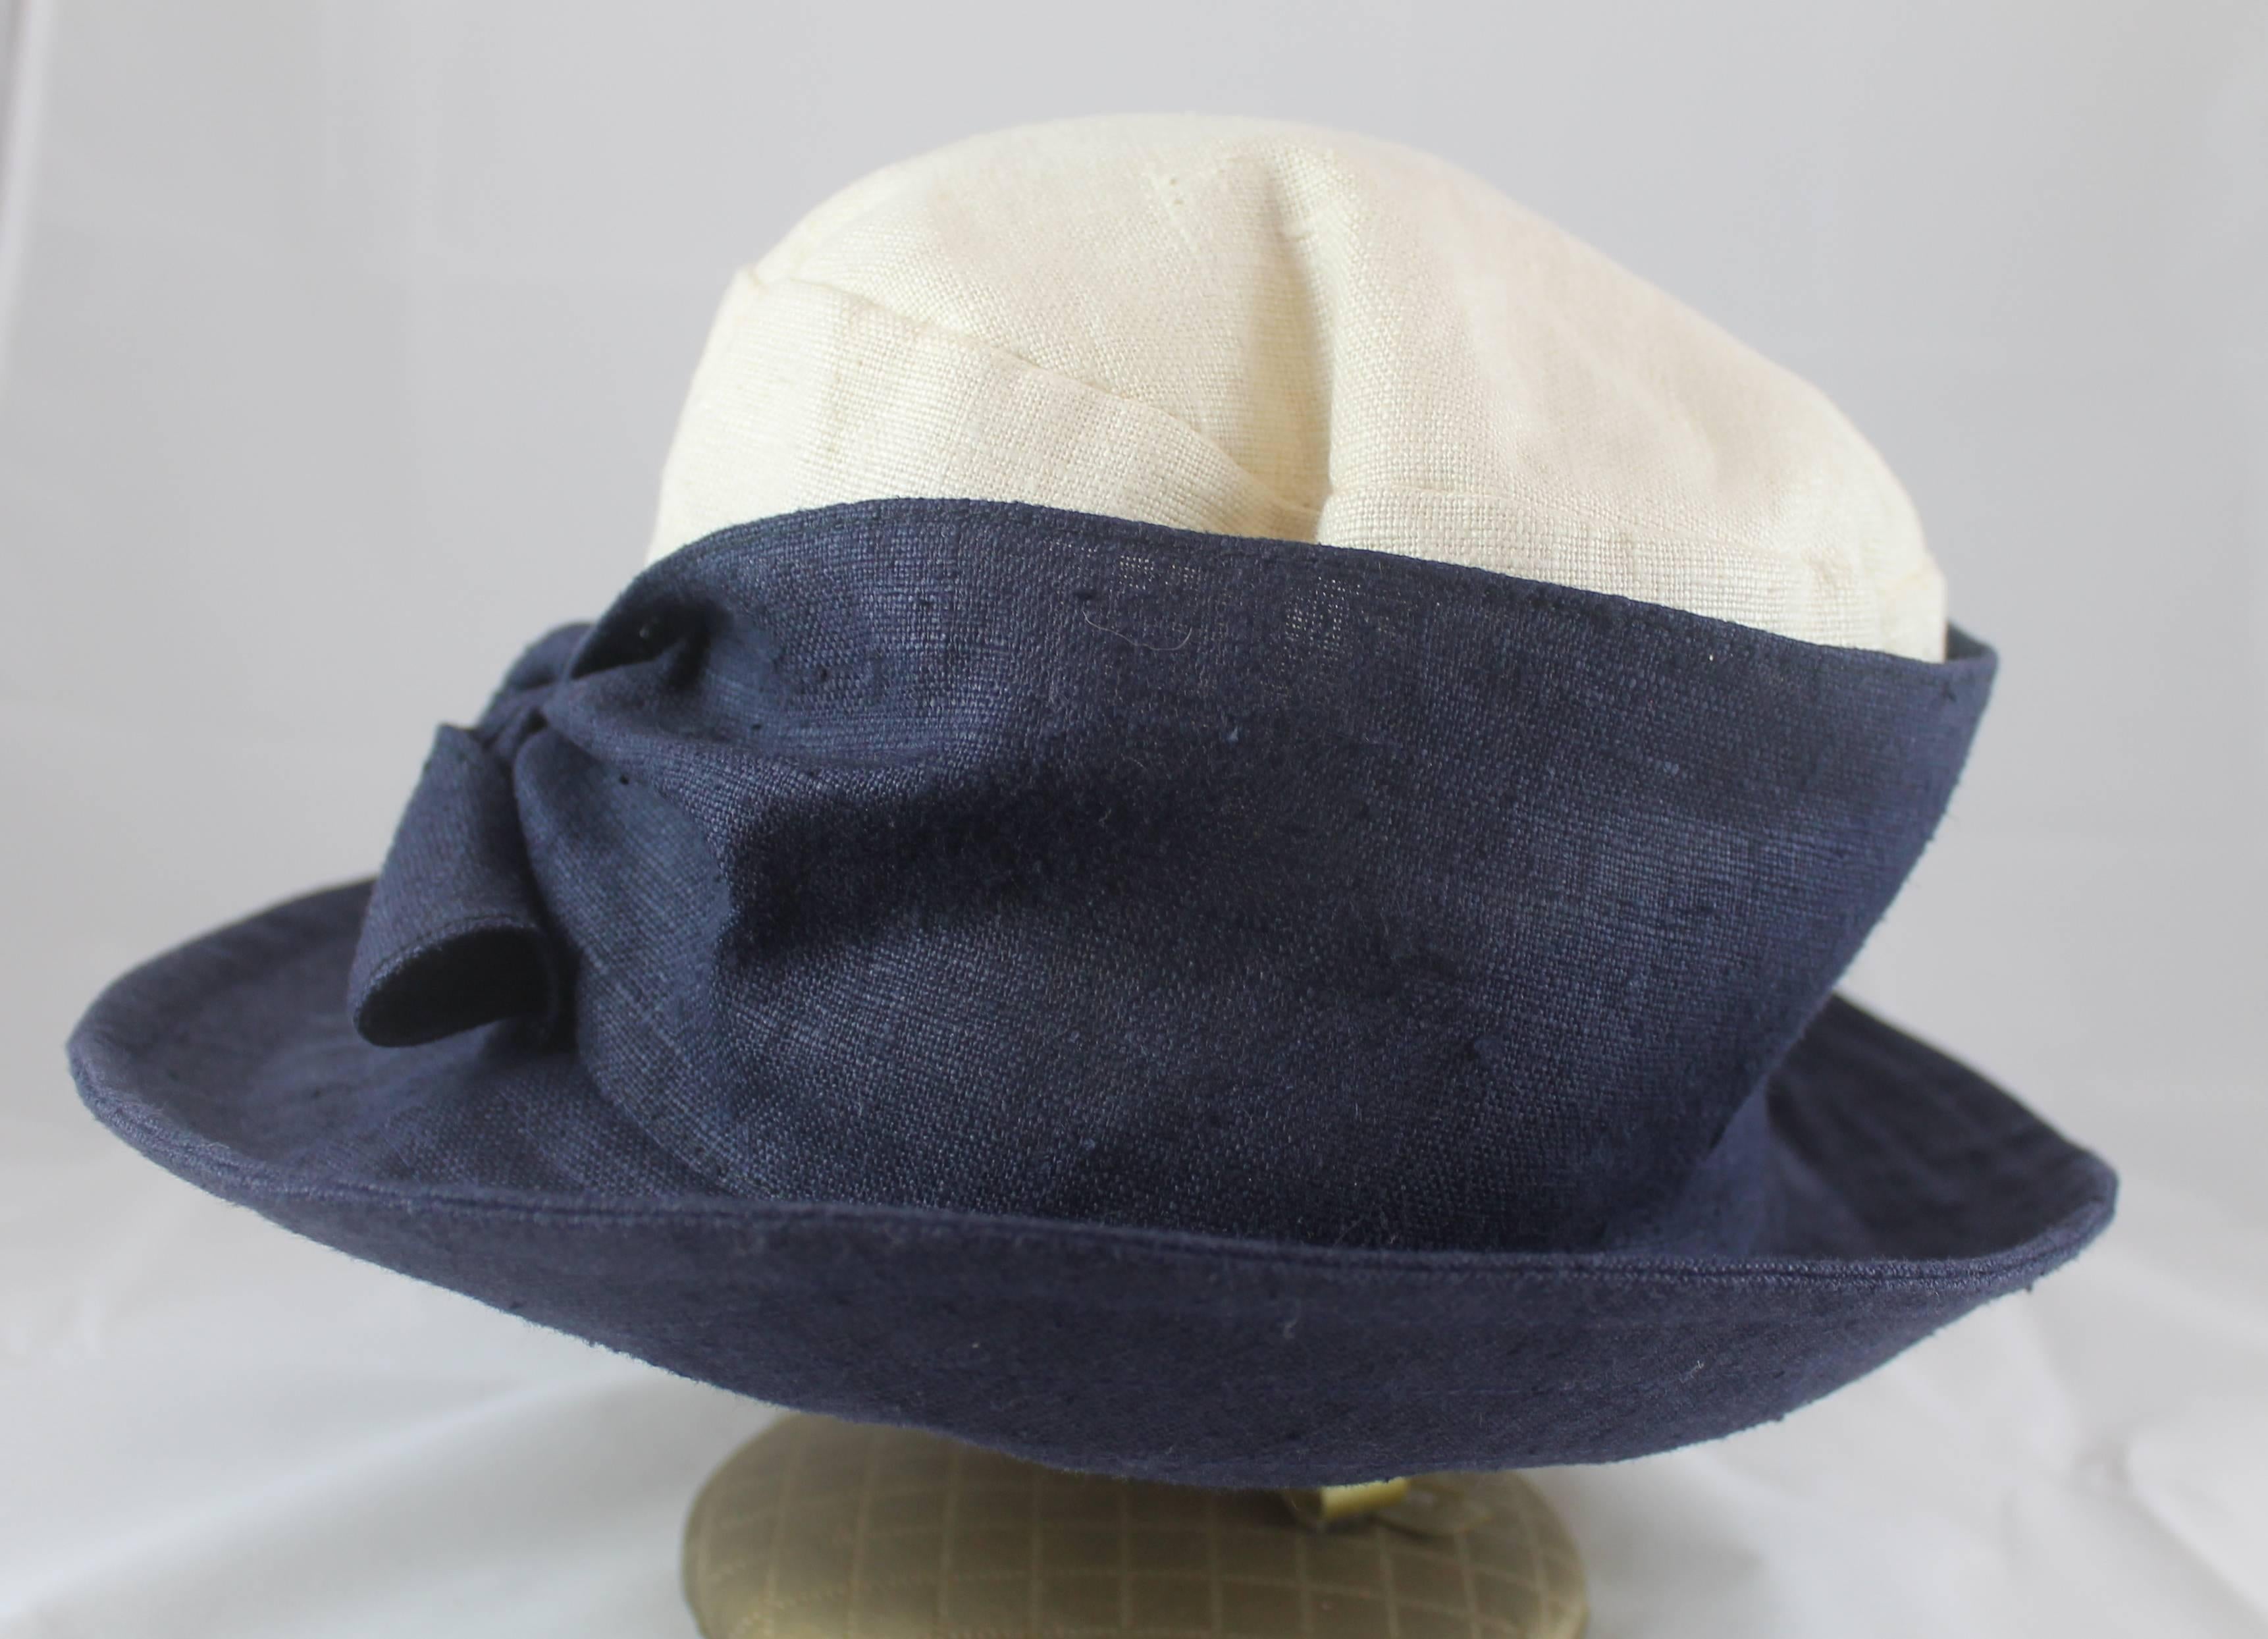 Deborah Rhodes Collection  Ivory & Navy Canvas Hat with Front Tie. This hat is in very good condition with minor pulling on the top and sides. The light weight hat is great for spring and summer.

Brim- 3